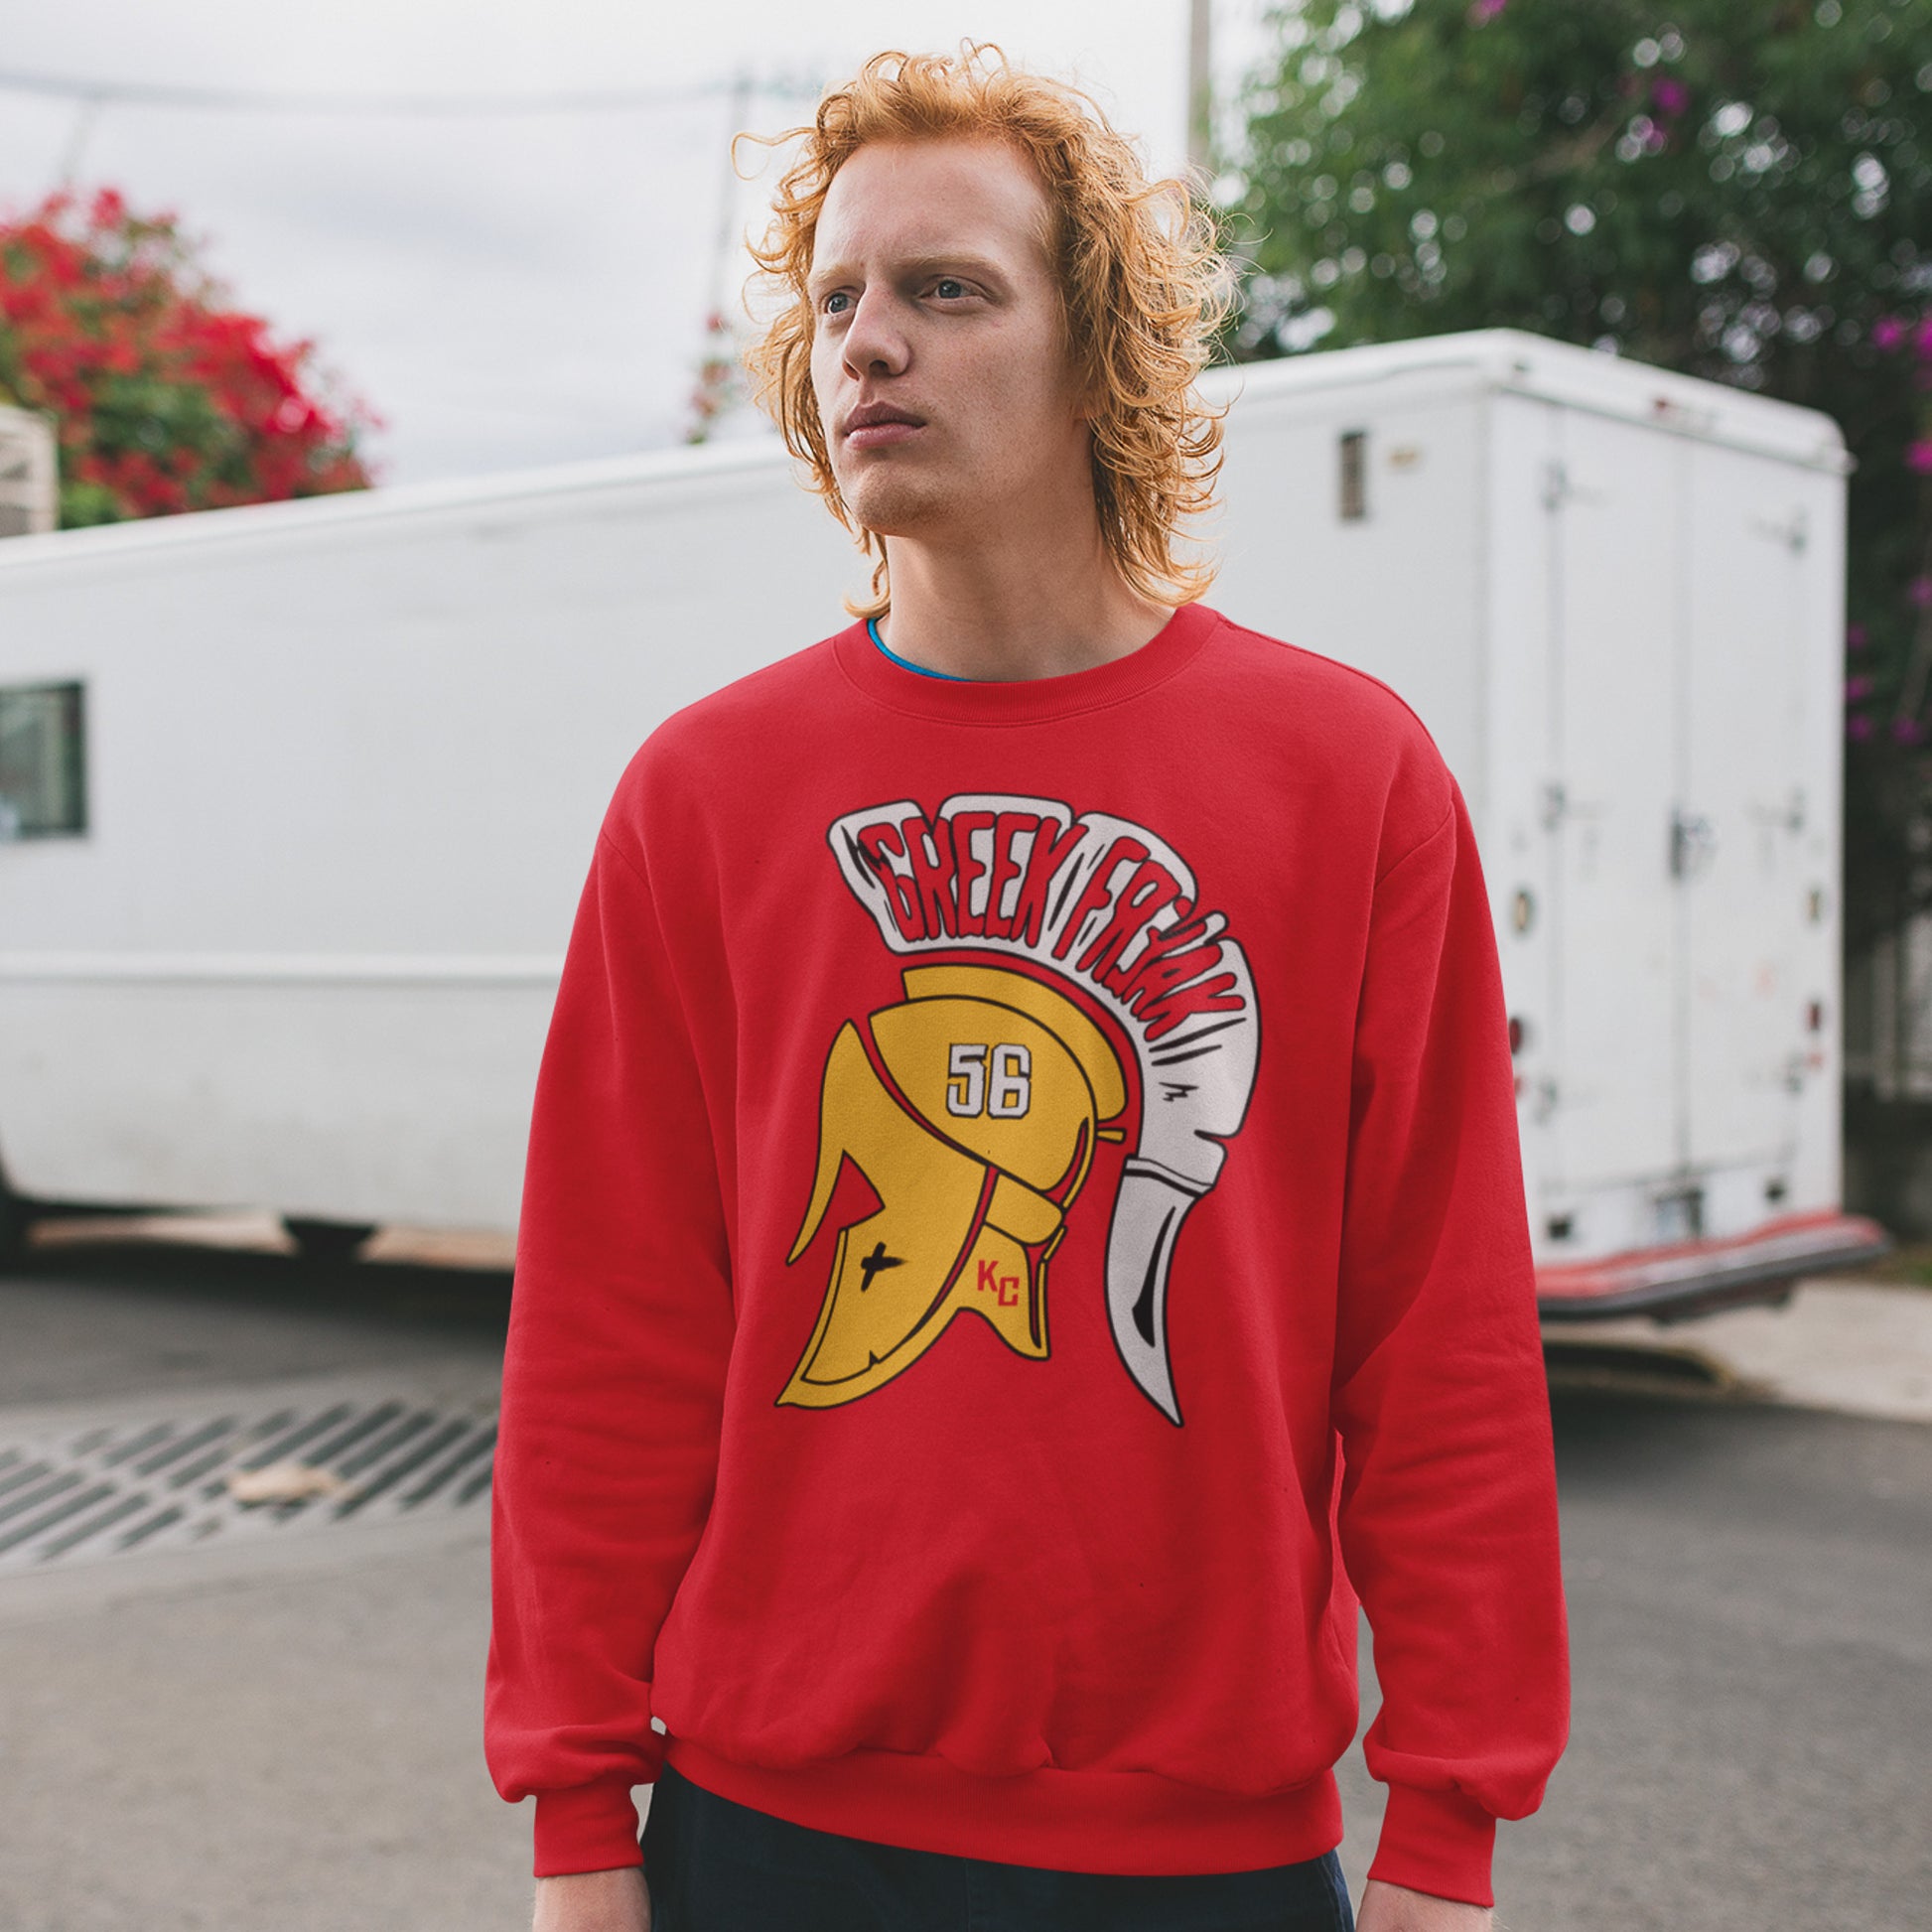 KC Swag Kansas City Chiefs White & Gold Greek Freak (with Trojan Helmet) on a Red Crewneck Sweatshirt worn by ginger-haired male model standing in a parking lot in front of a white delivery truck